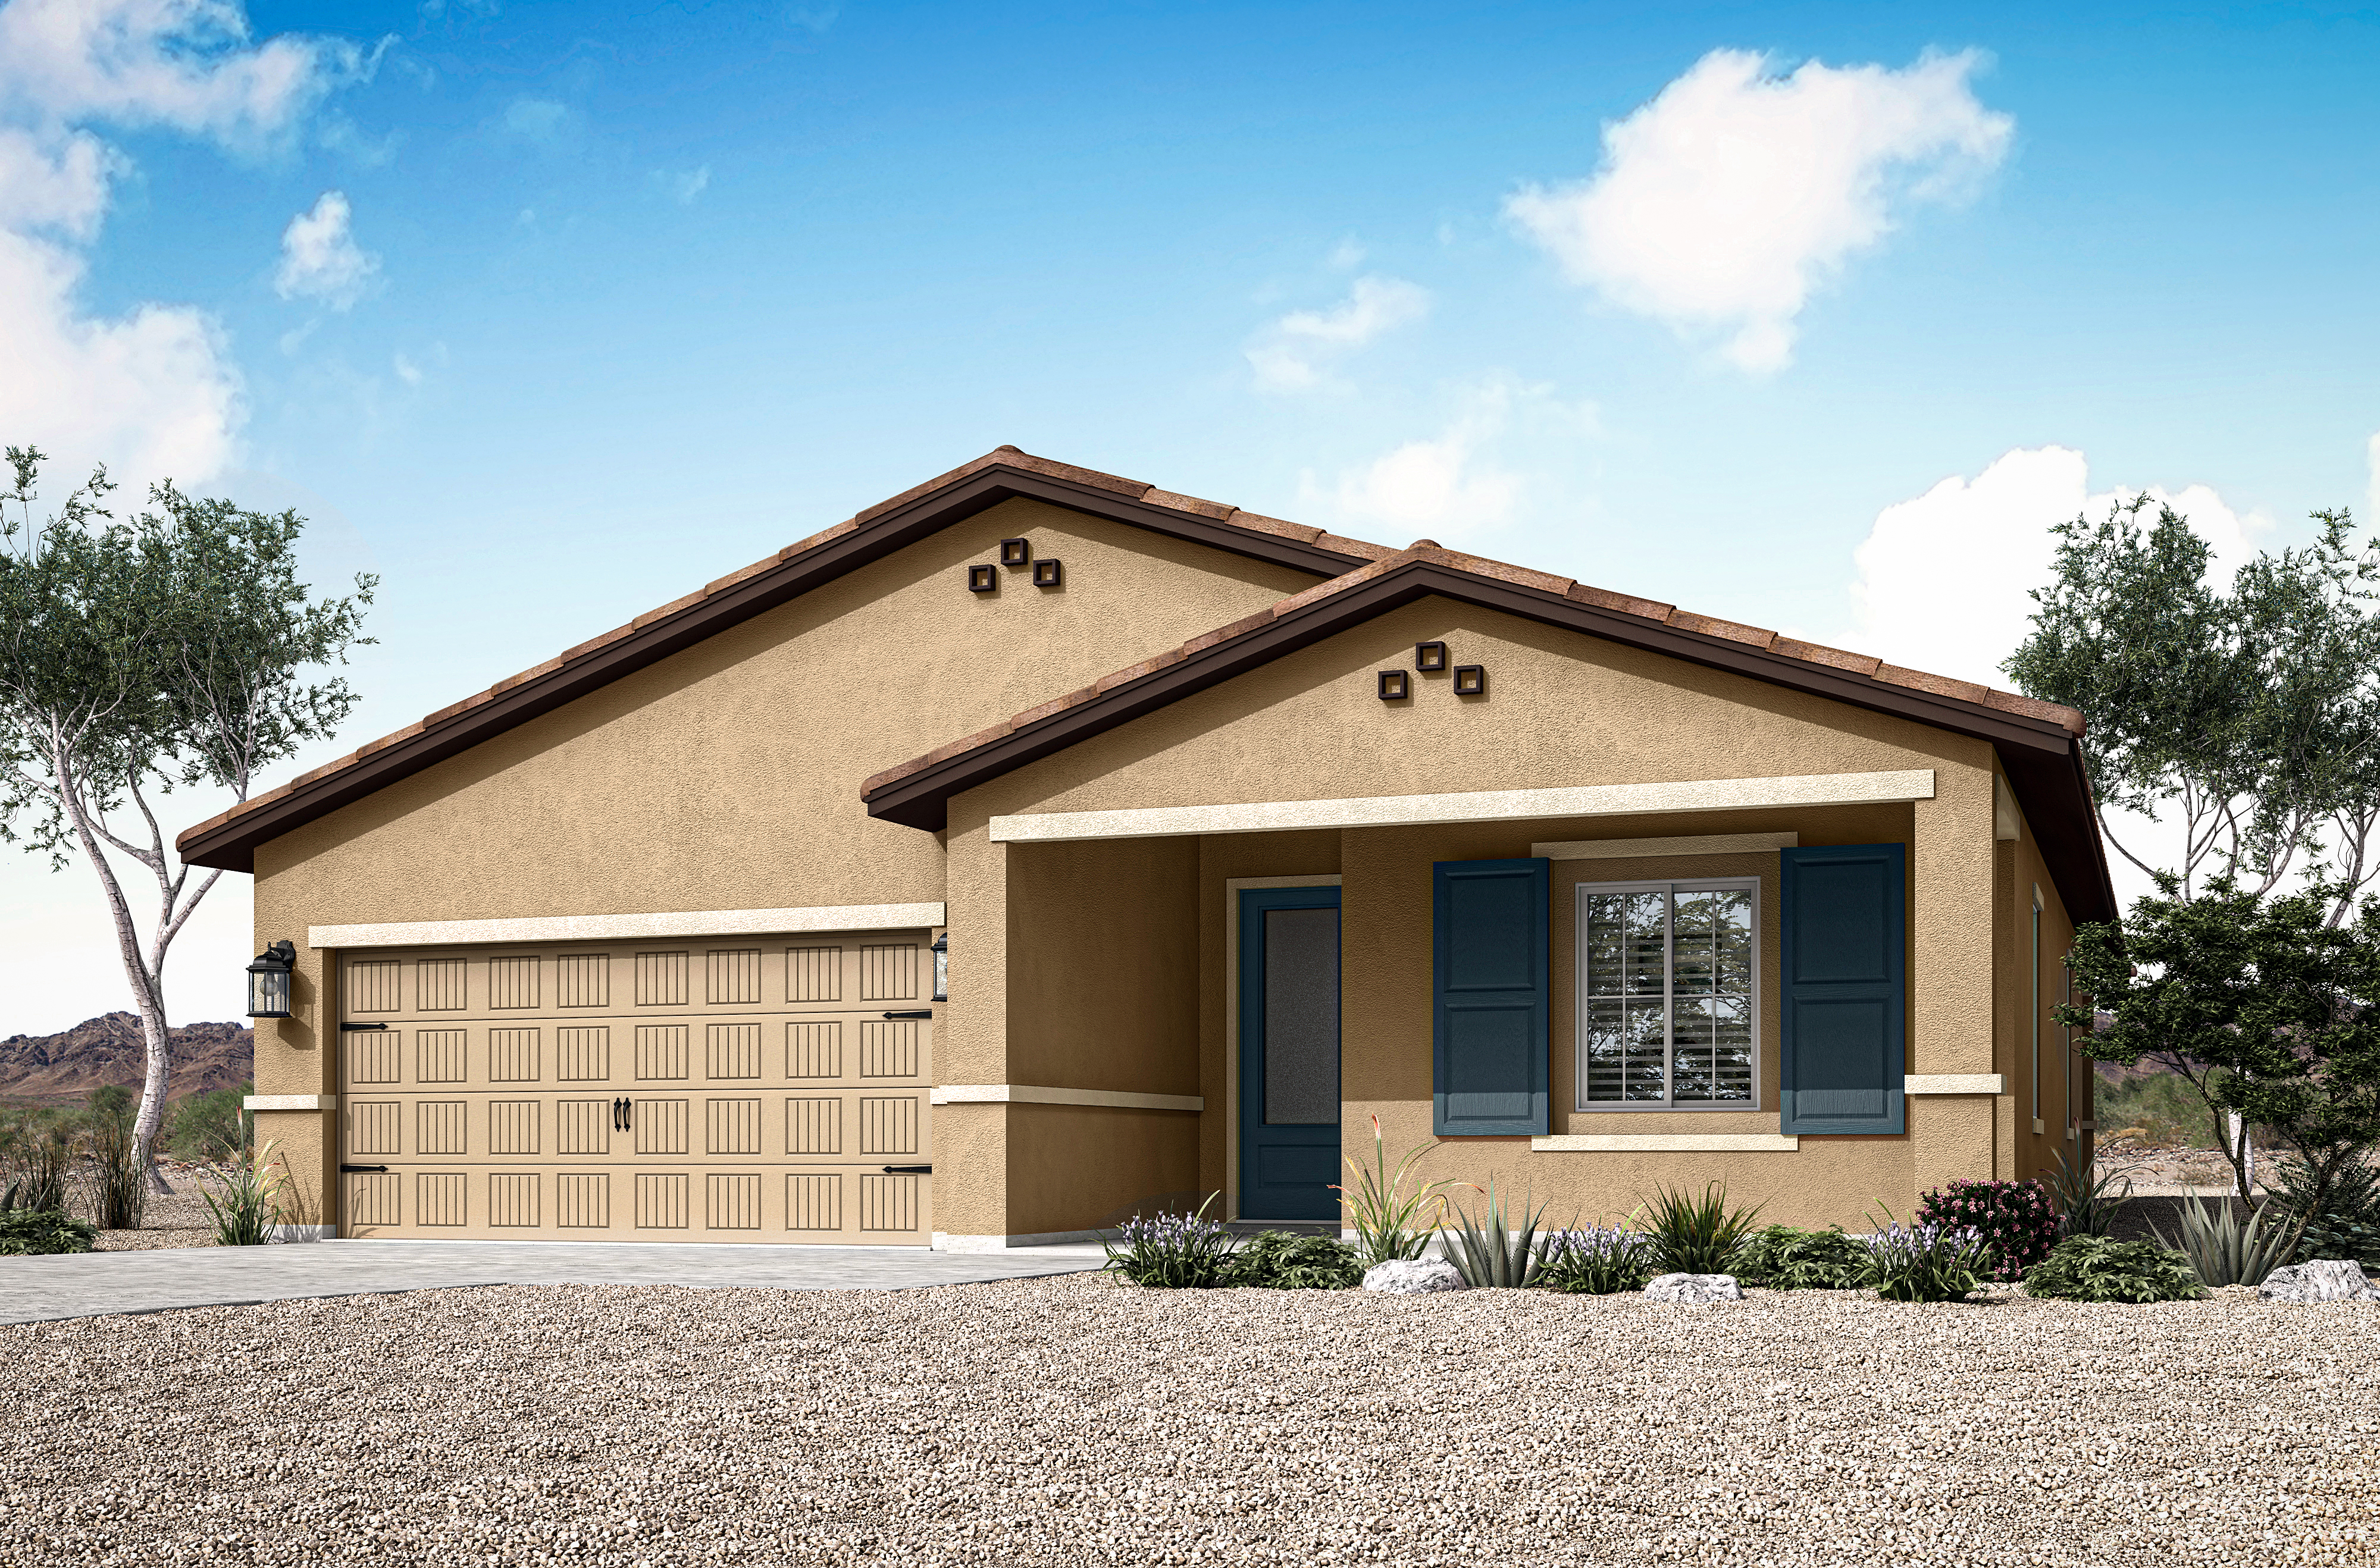 Northgate by LGI Homes offers a variety of brand-new, move-in ready homes located off I-10 in Indio.